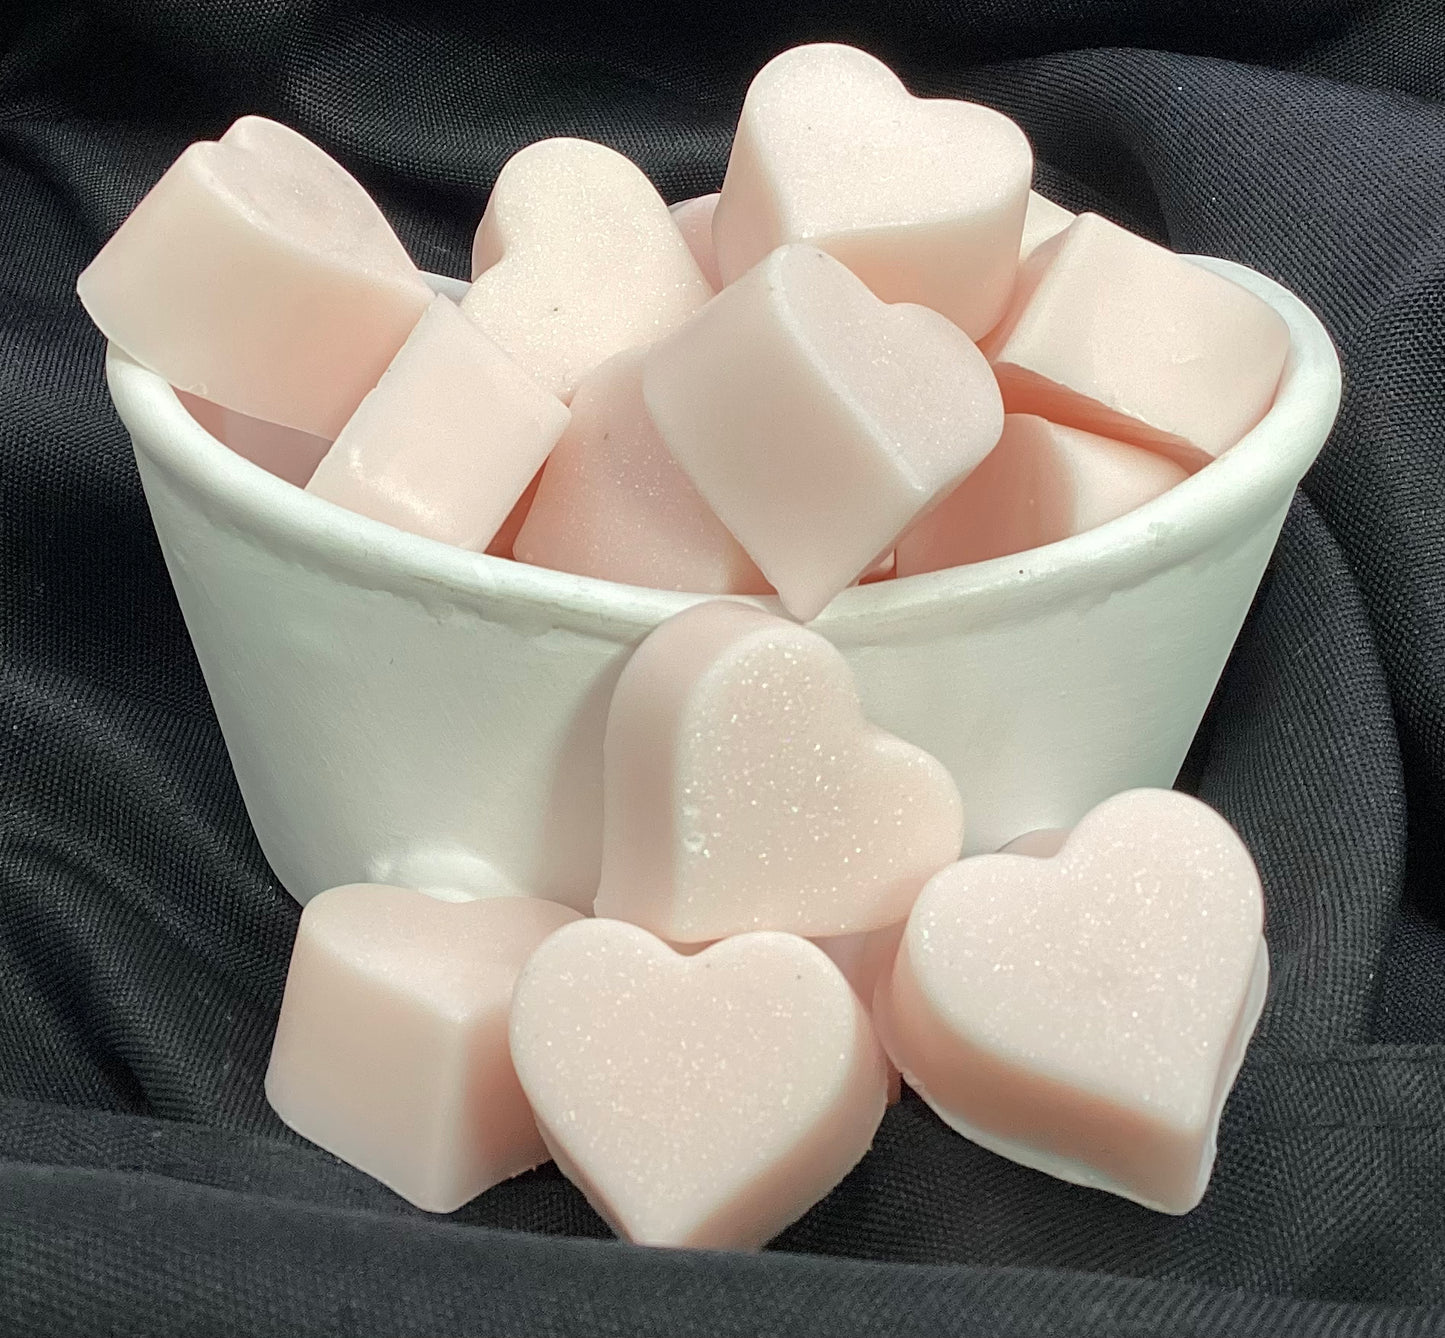 Small heart-shaped Rose scented Goats Milk soap with sparkles!  

$1

Each item is individually made and may appear different from the photo.